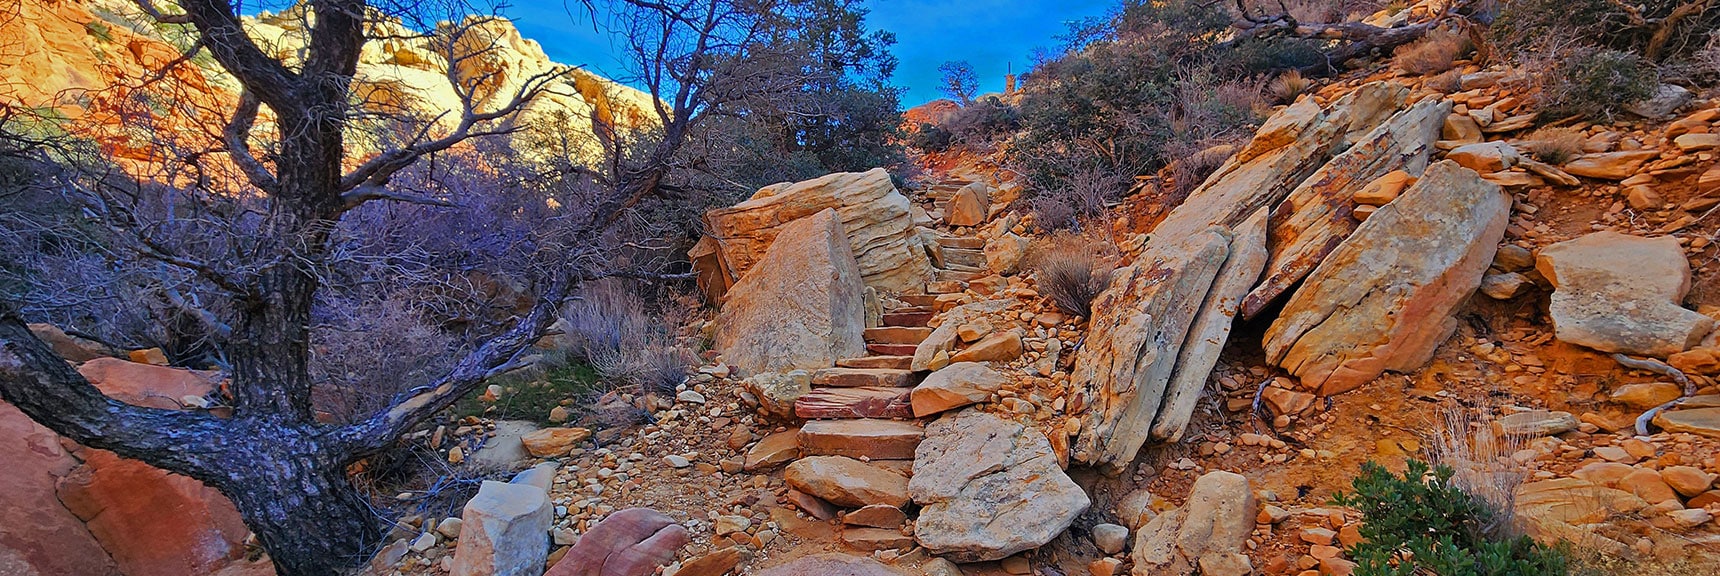 Artistic Stairways Attest to the Beauty of this Trail | Upper Calico Hills Loop | Calico Basin and Red Rock Canyon, Nevada